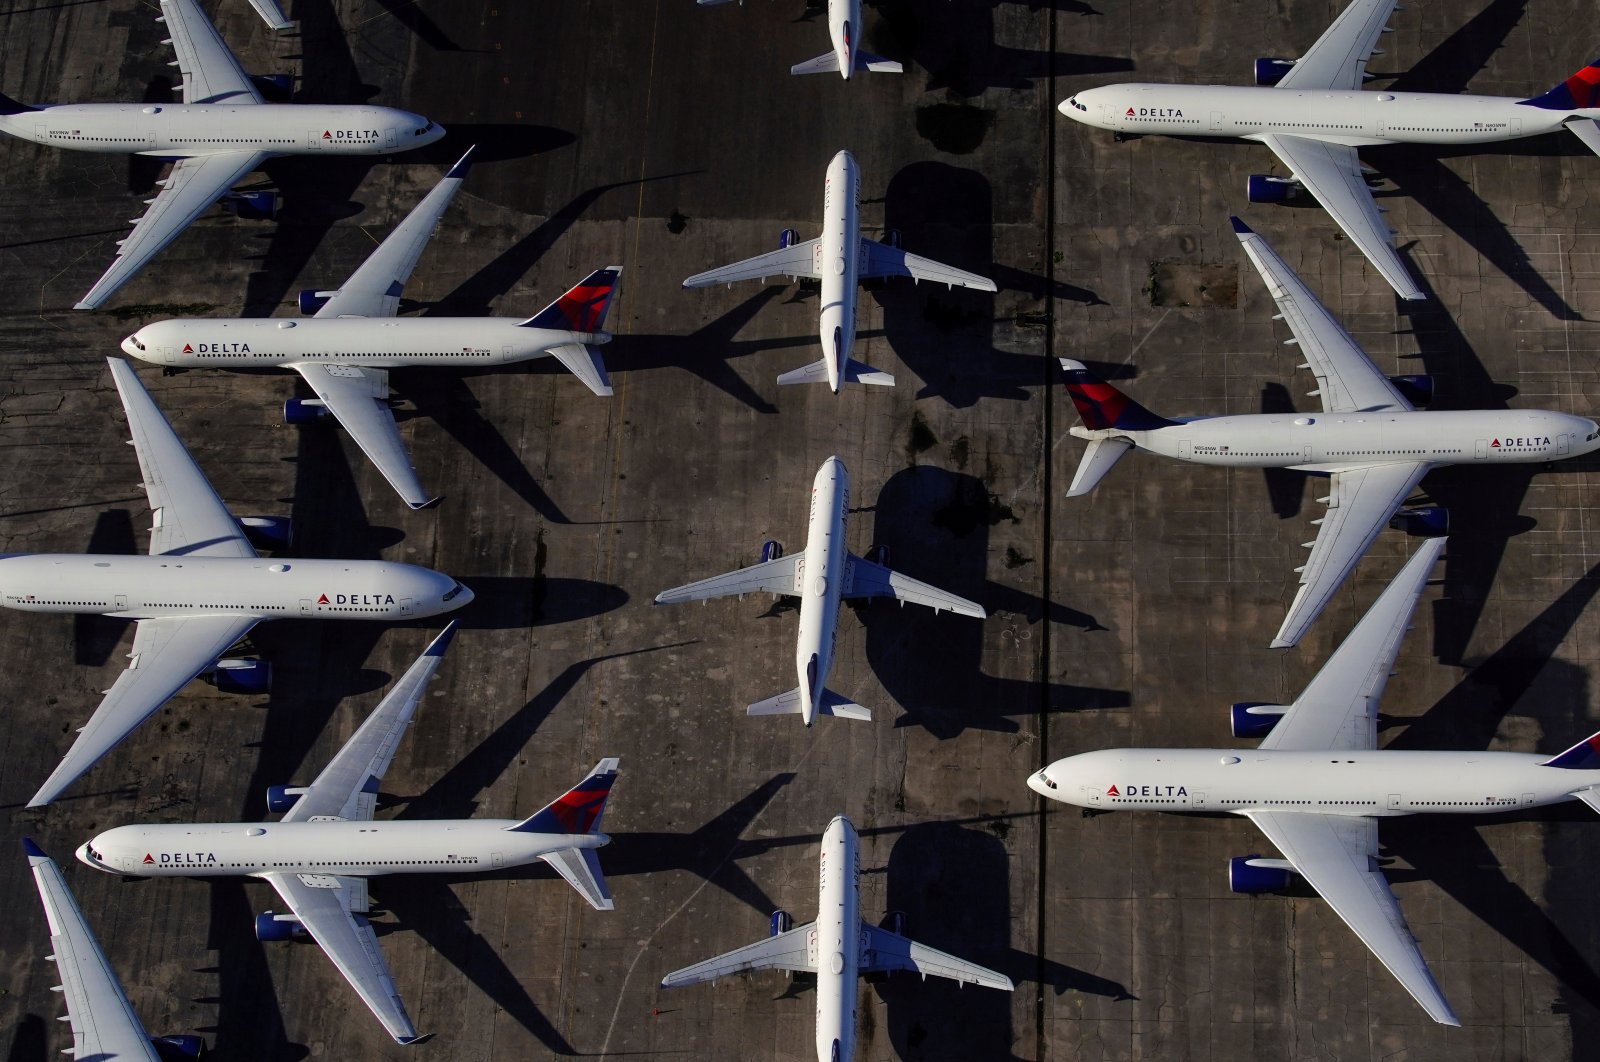 Delta Air Lines passenger planes are seen parked due to flight reductions made to slow the spread of coronavirus, at Birmingham-Shuttlesworth International Airport in Birmingham, Alabama, U.S., March 25, 2020. (Reuters Photo)